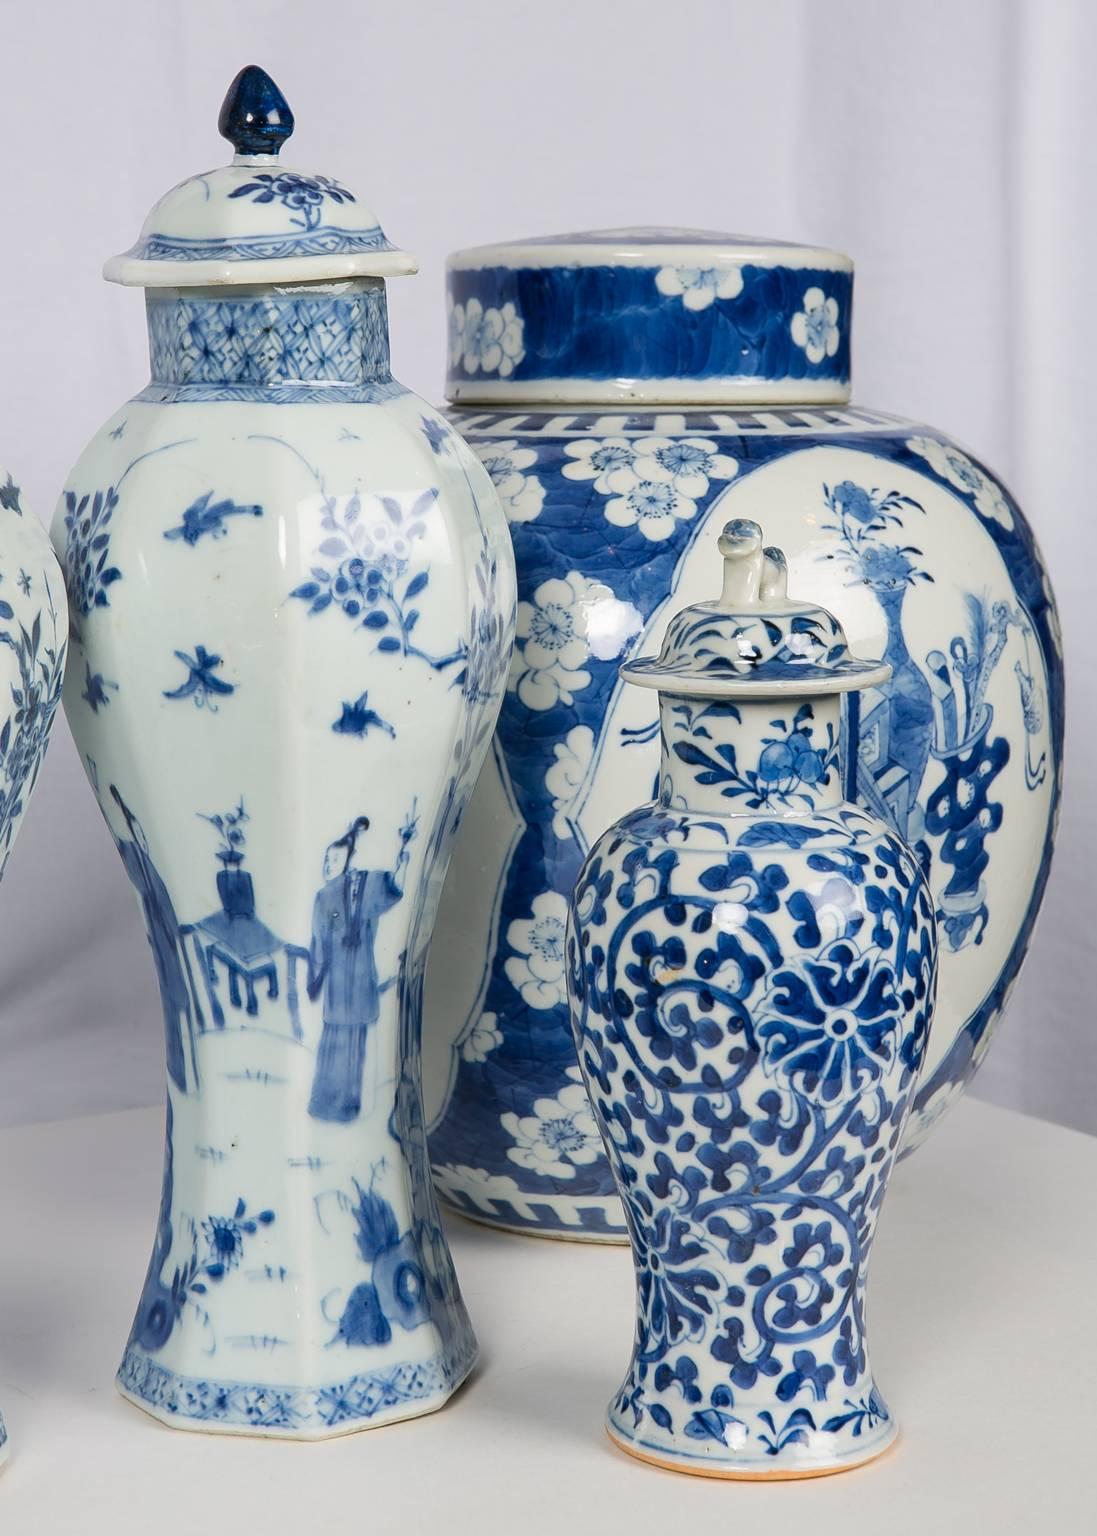 19th Century Blue and White Chinese Porcelain a Collection